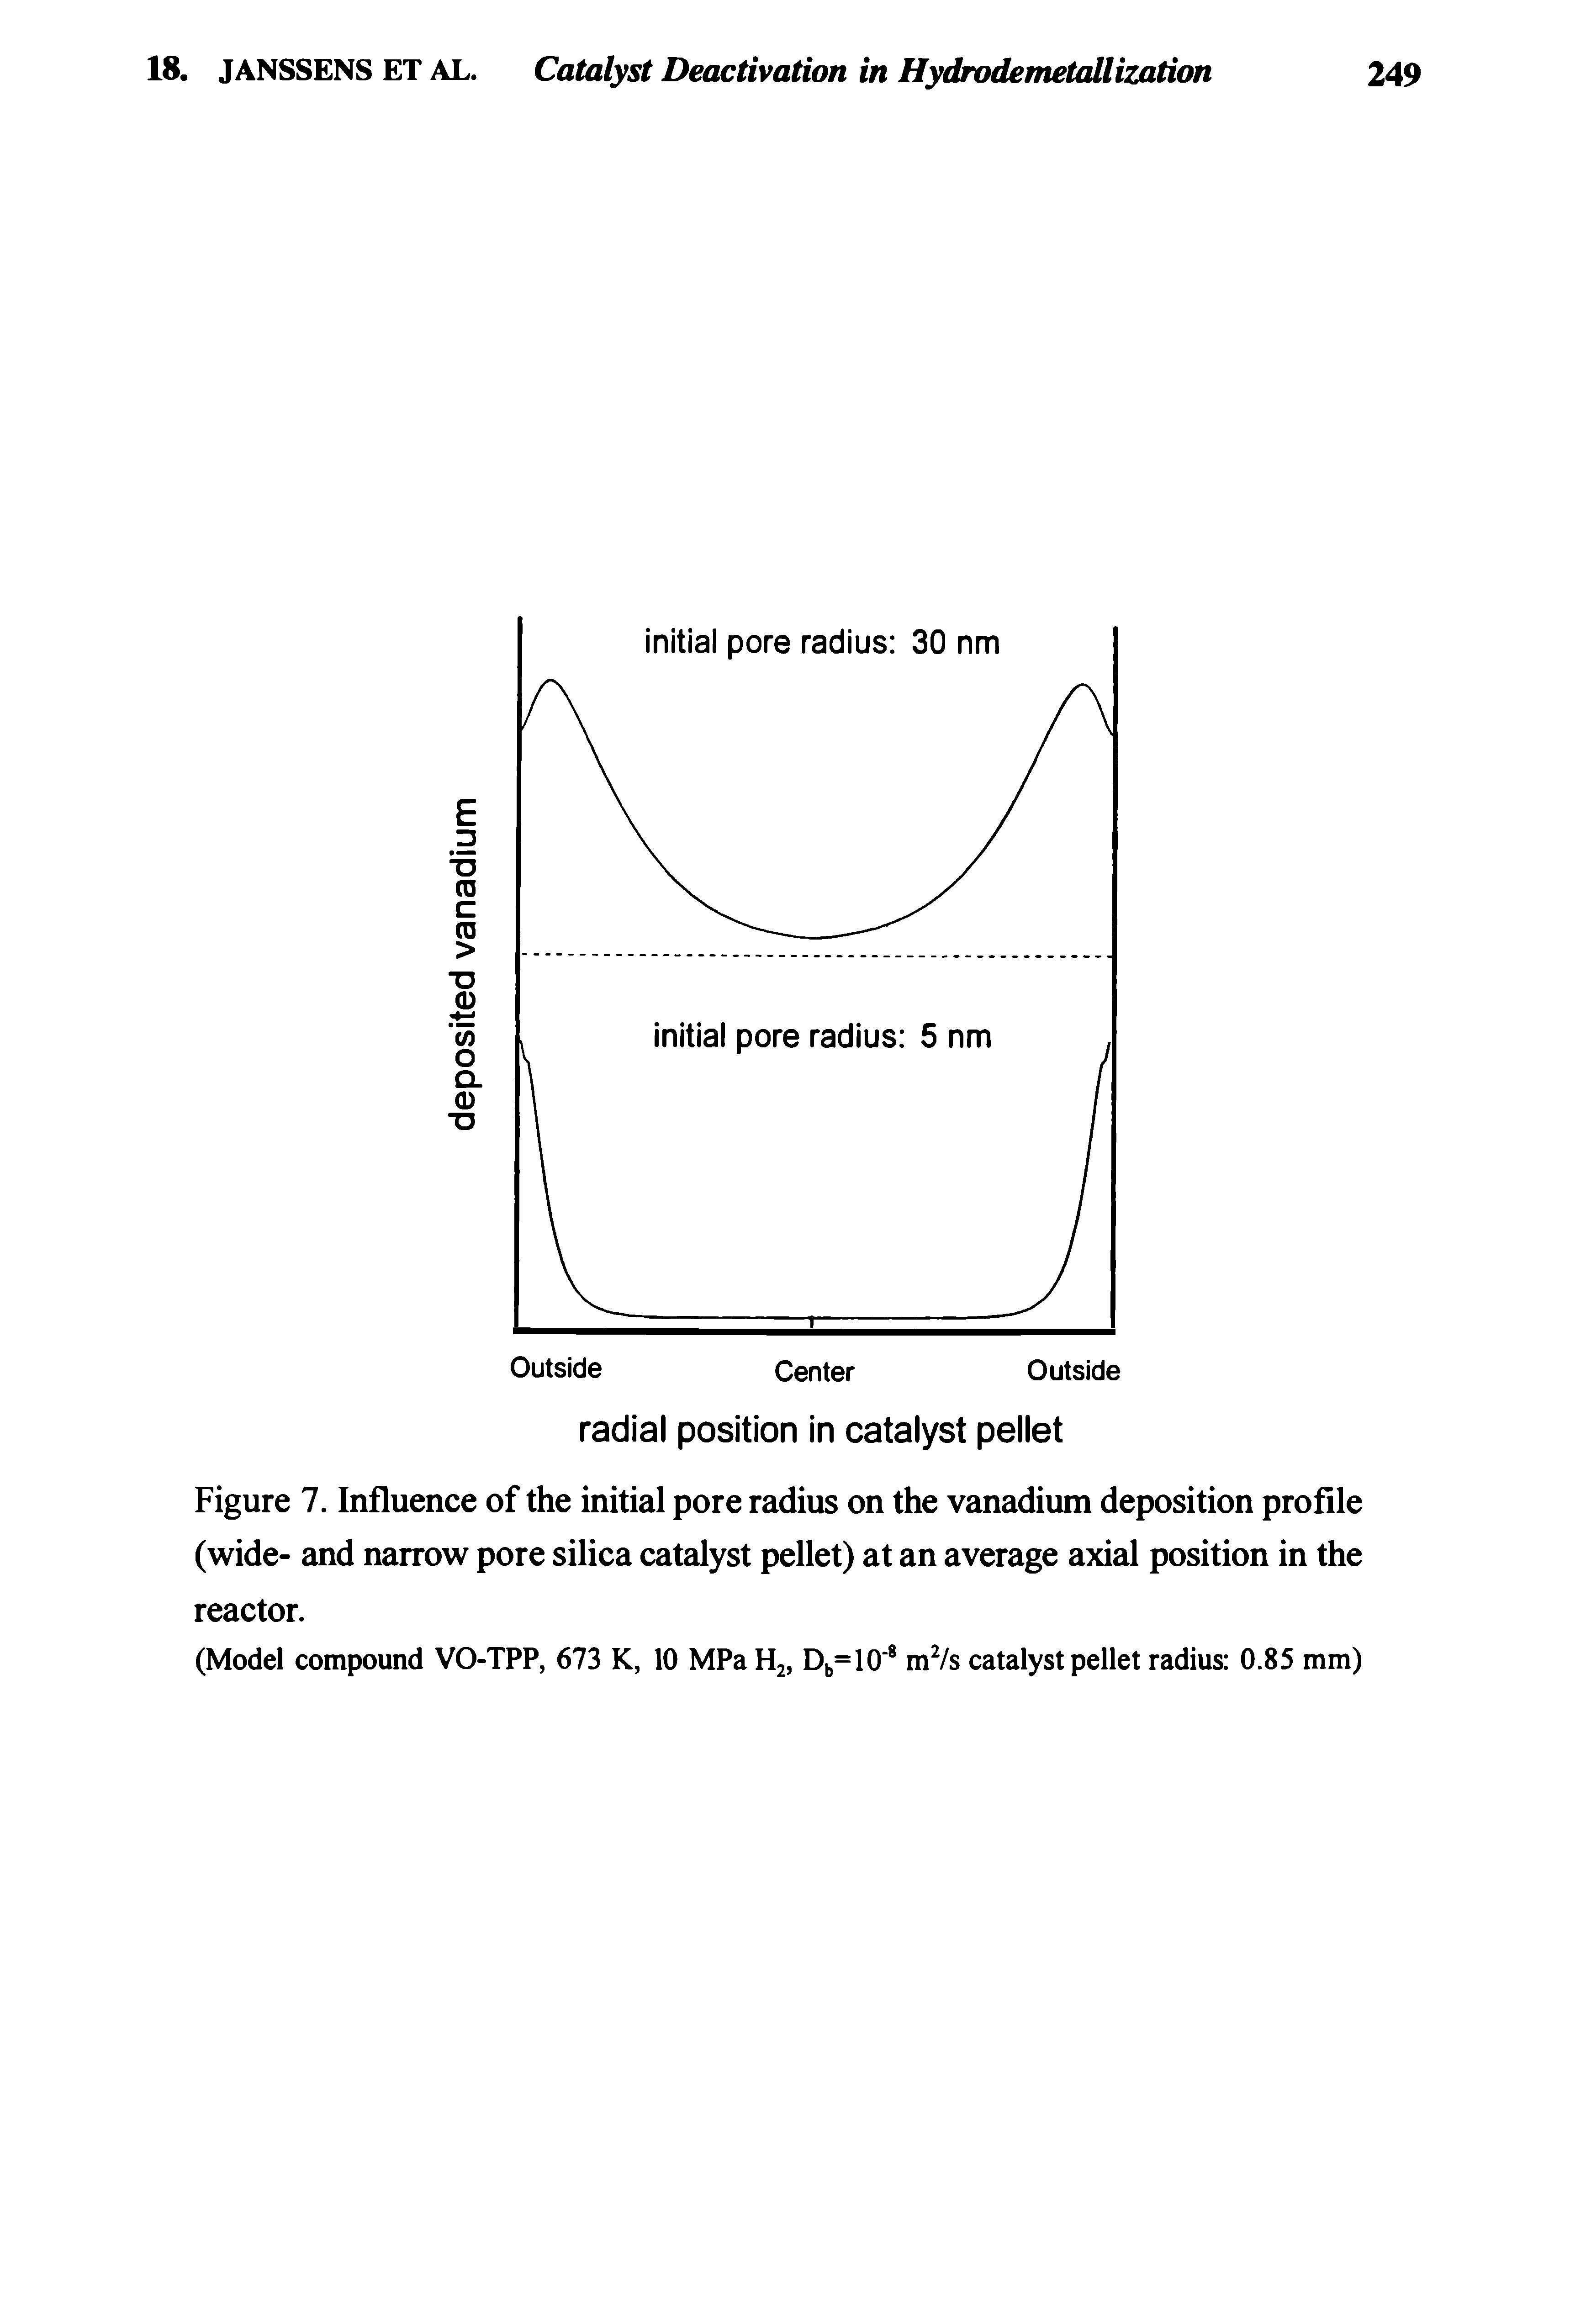 Figure 7. Influence of the initial pore radius on the vanadium deposition profile (wide- and narrow pore silica catalyst pellet) at an average axial position in the reactor.